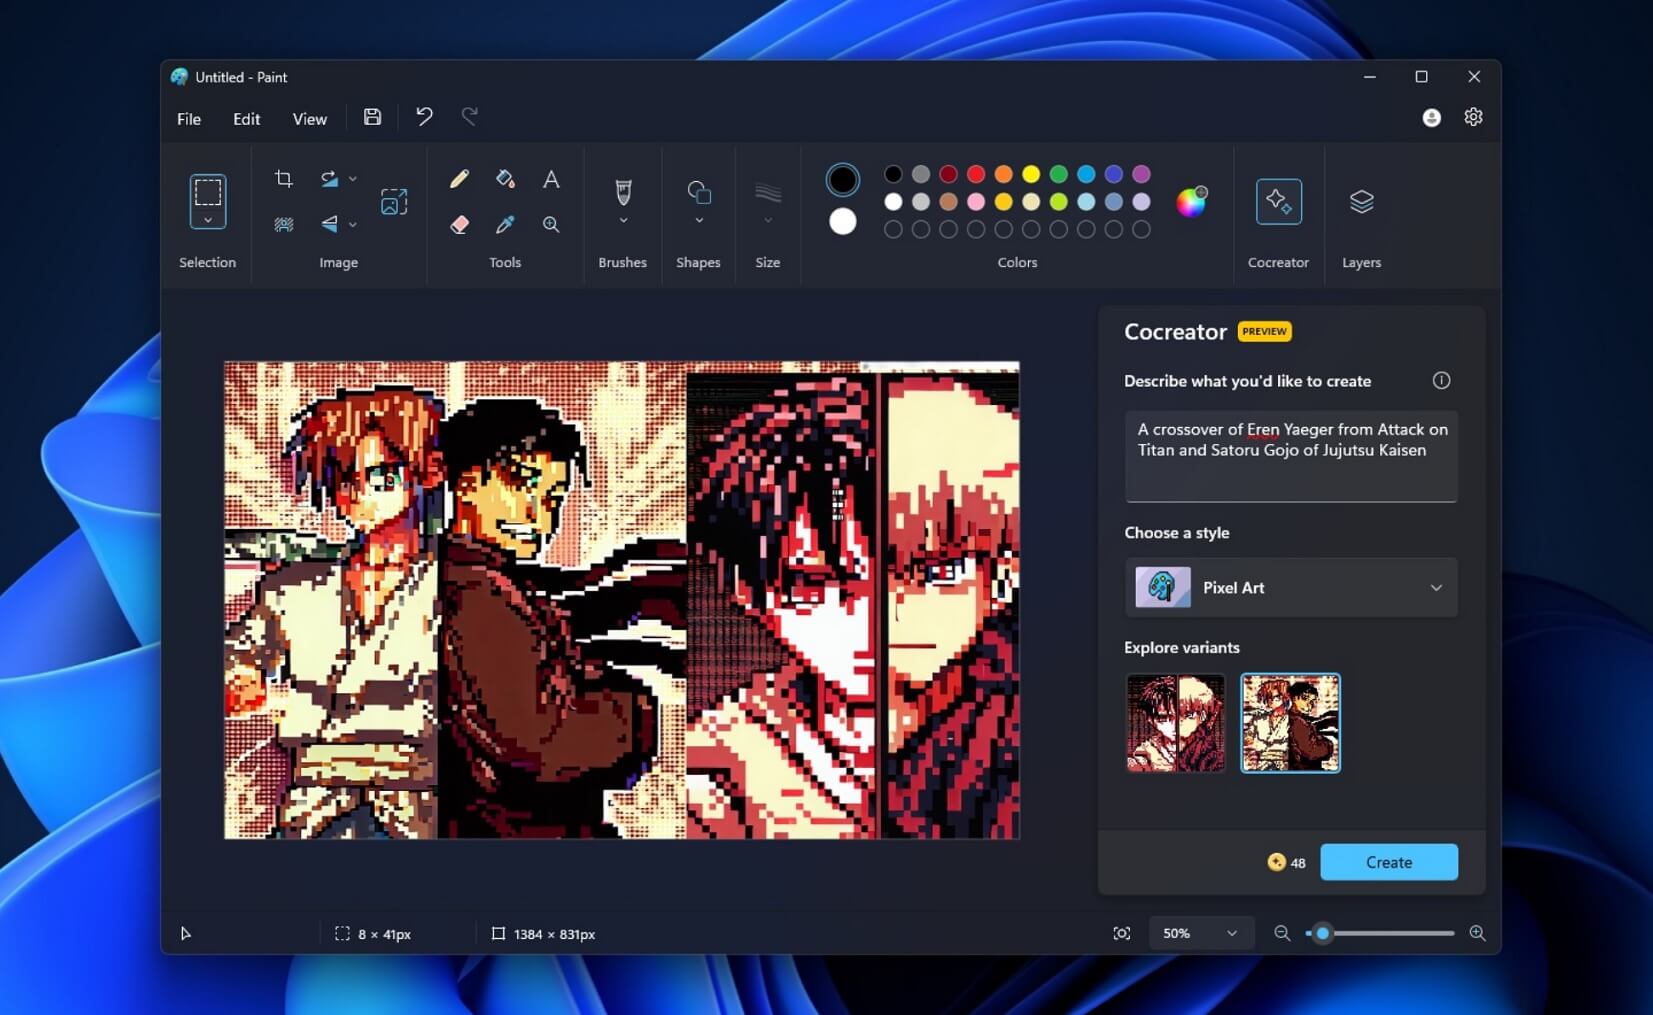 Paint for Windows 11 has learned how to generate images using AI